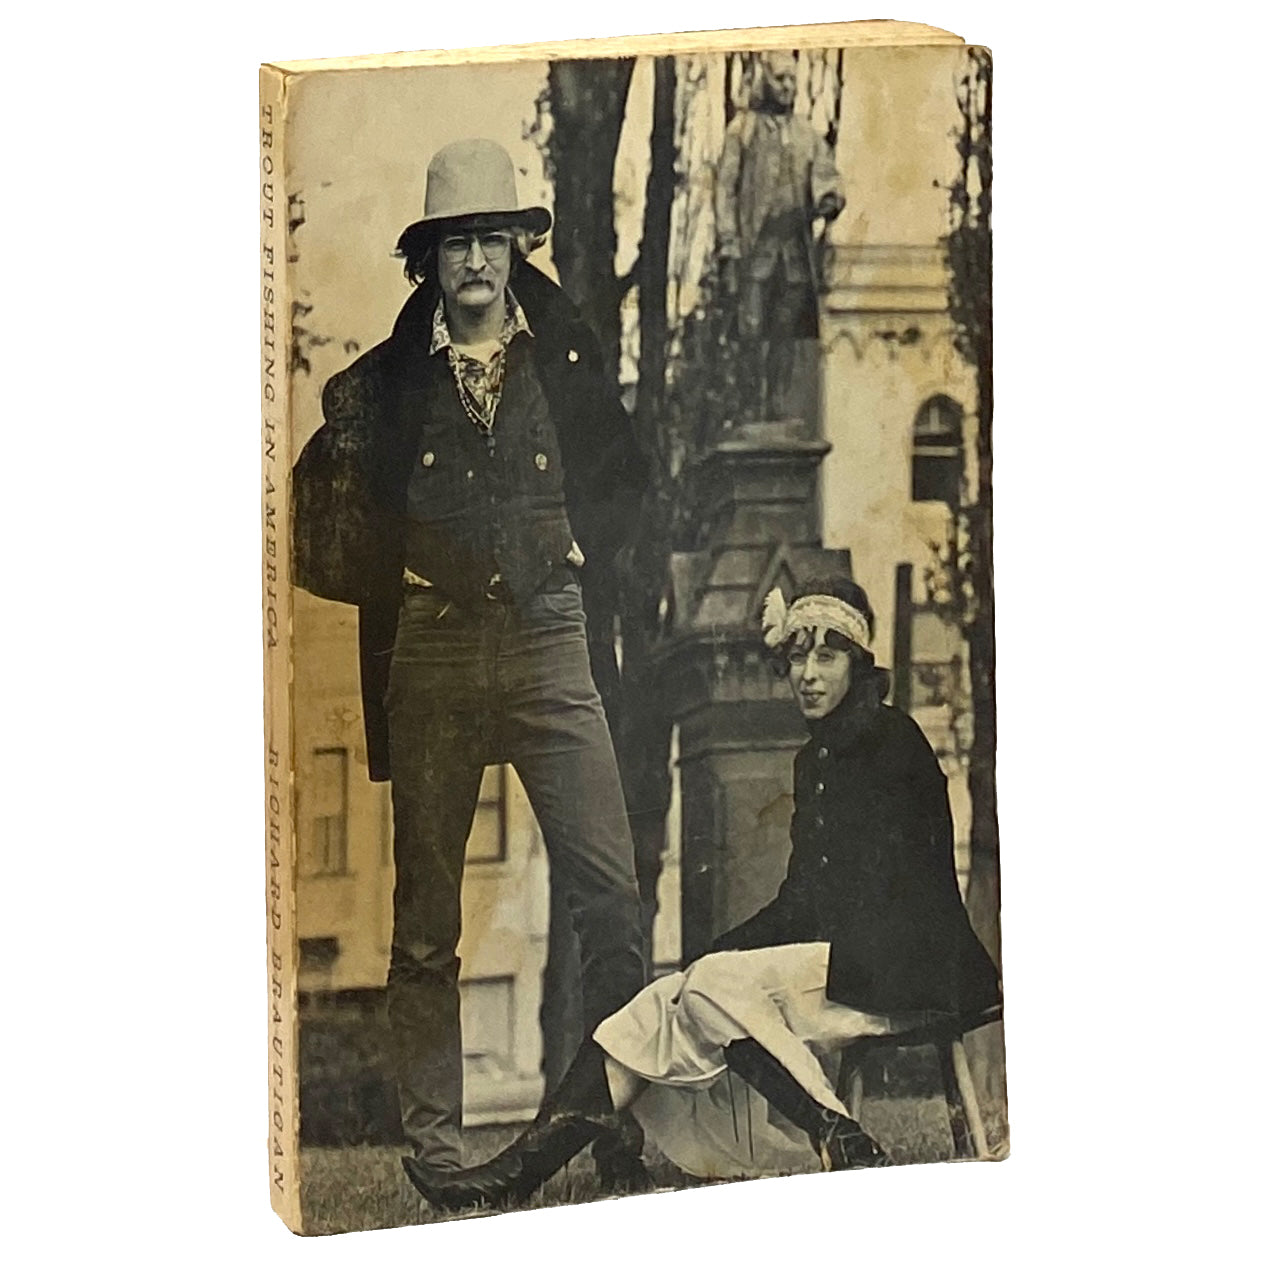 Trout Fishing in America, Richard Brautigan. First Edition, Third Printing.